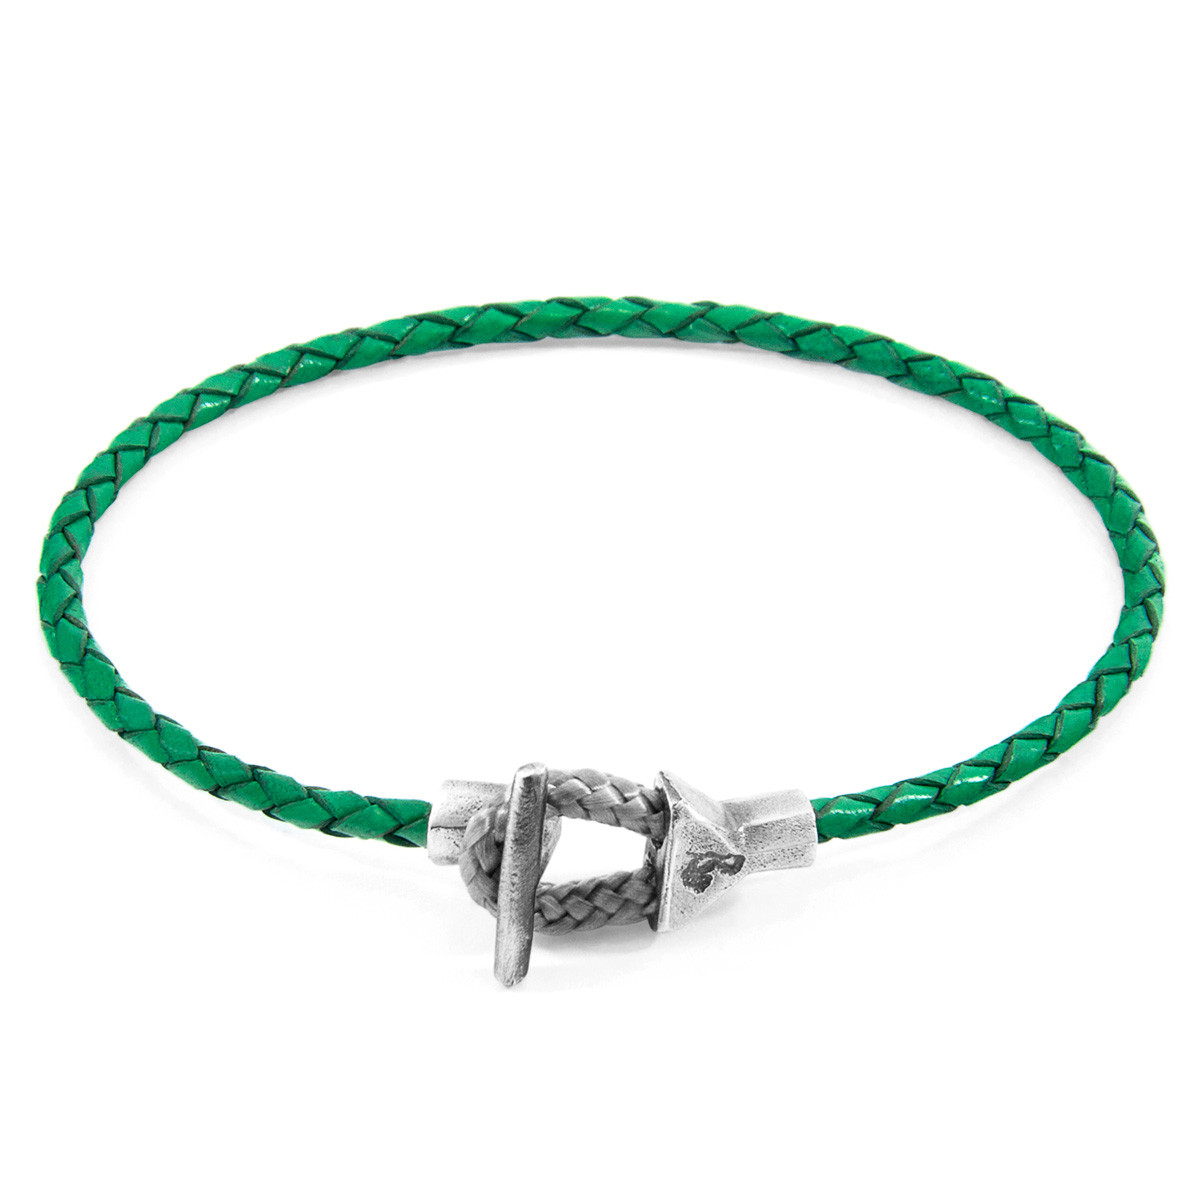 Anchor & Crew Fern Green Cullen Silver and Braided Leather Bracelet